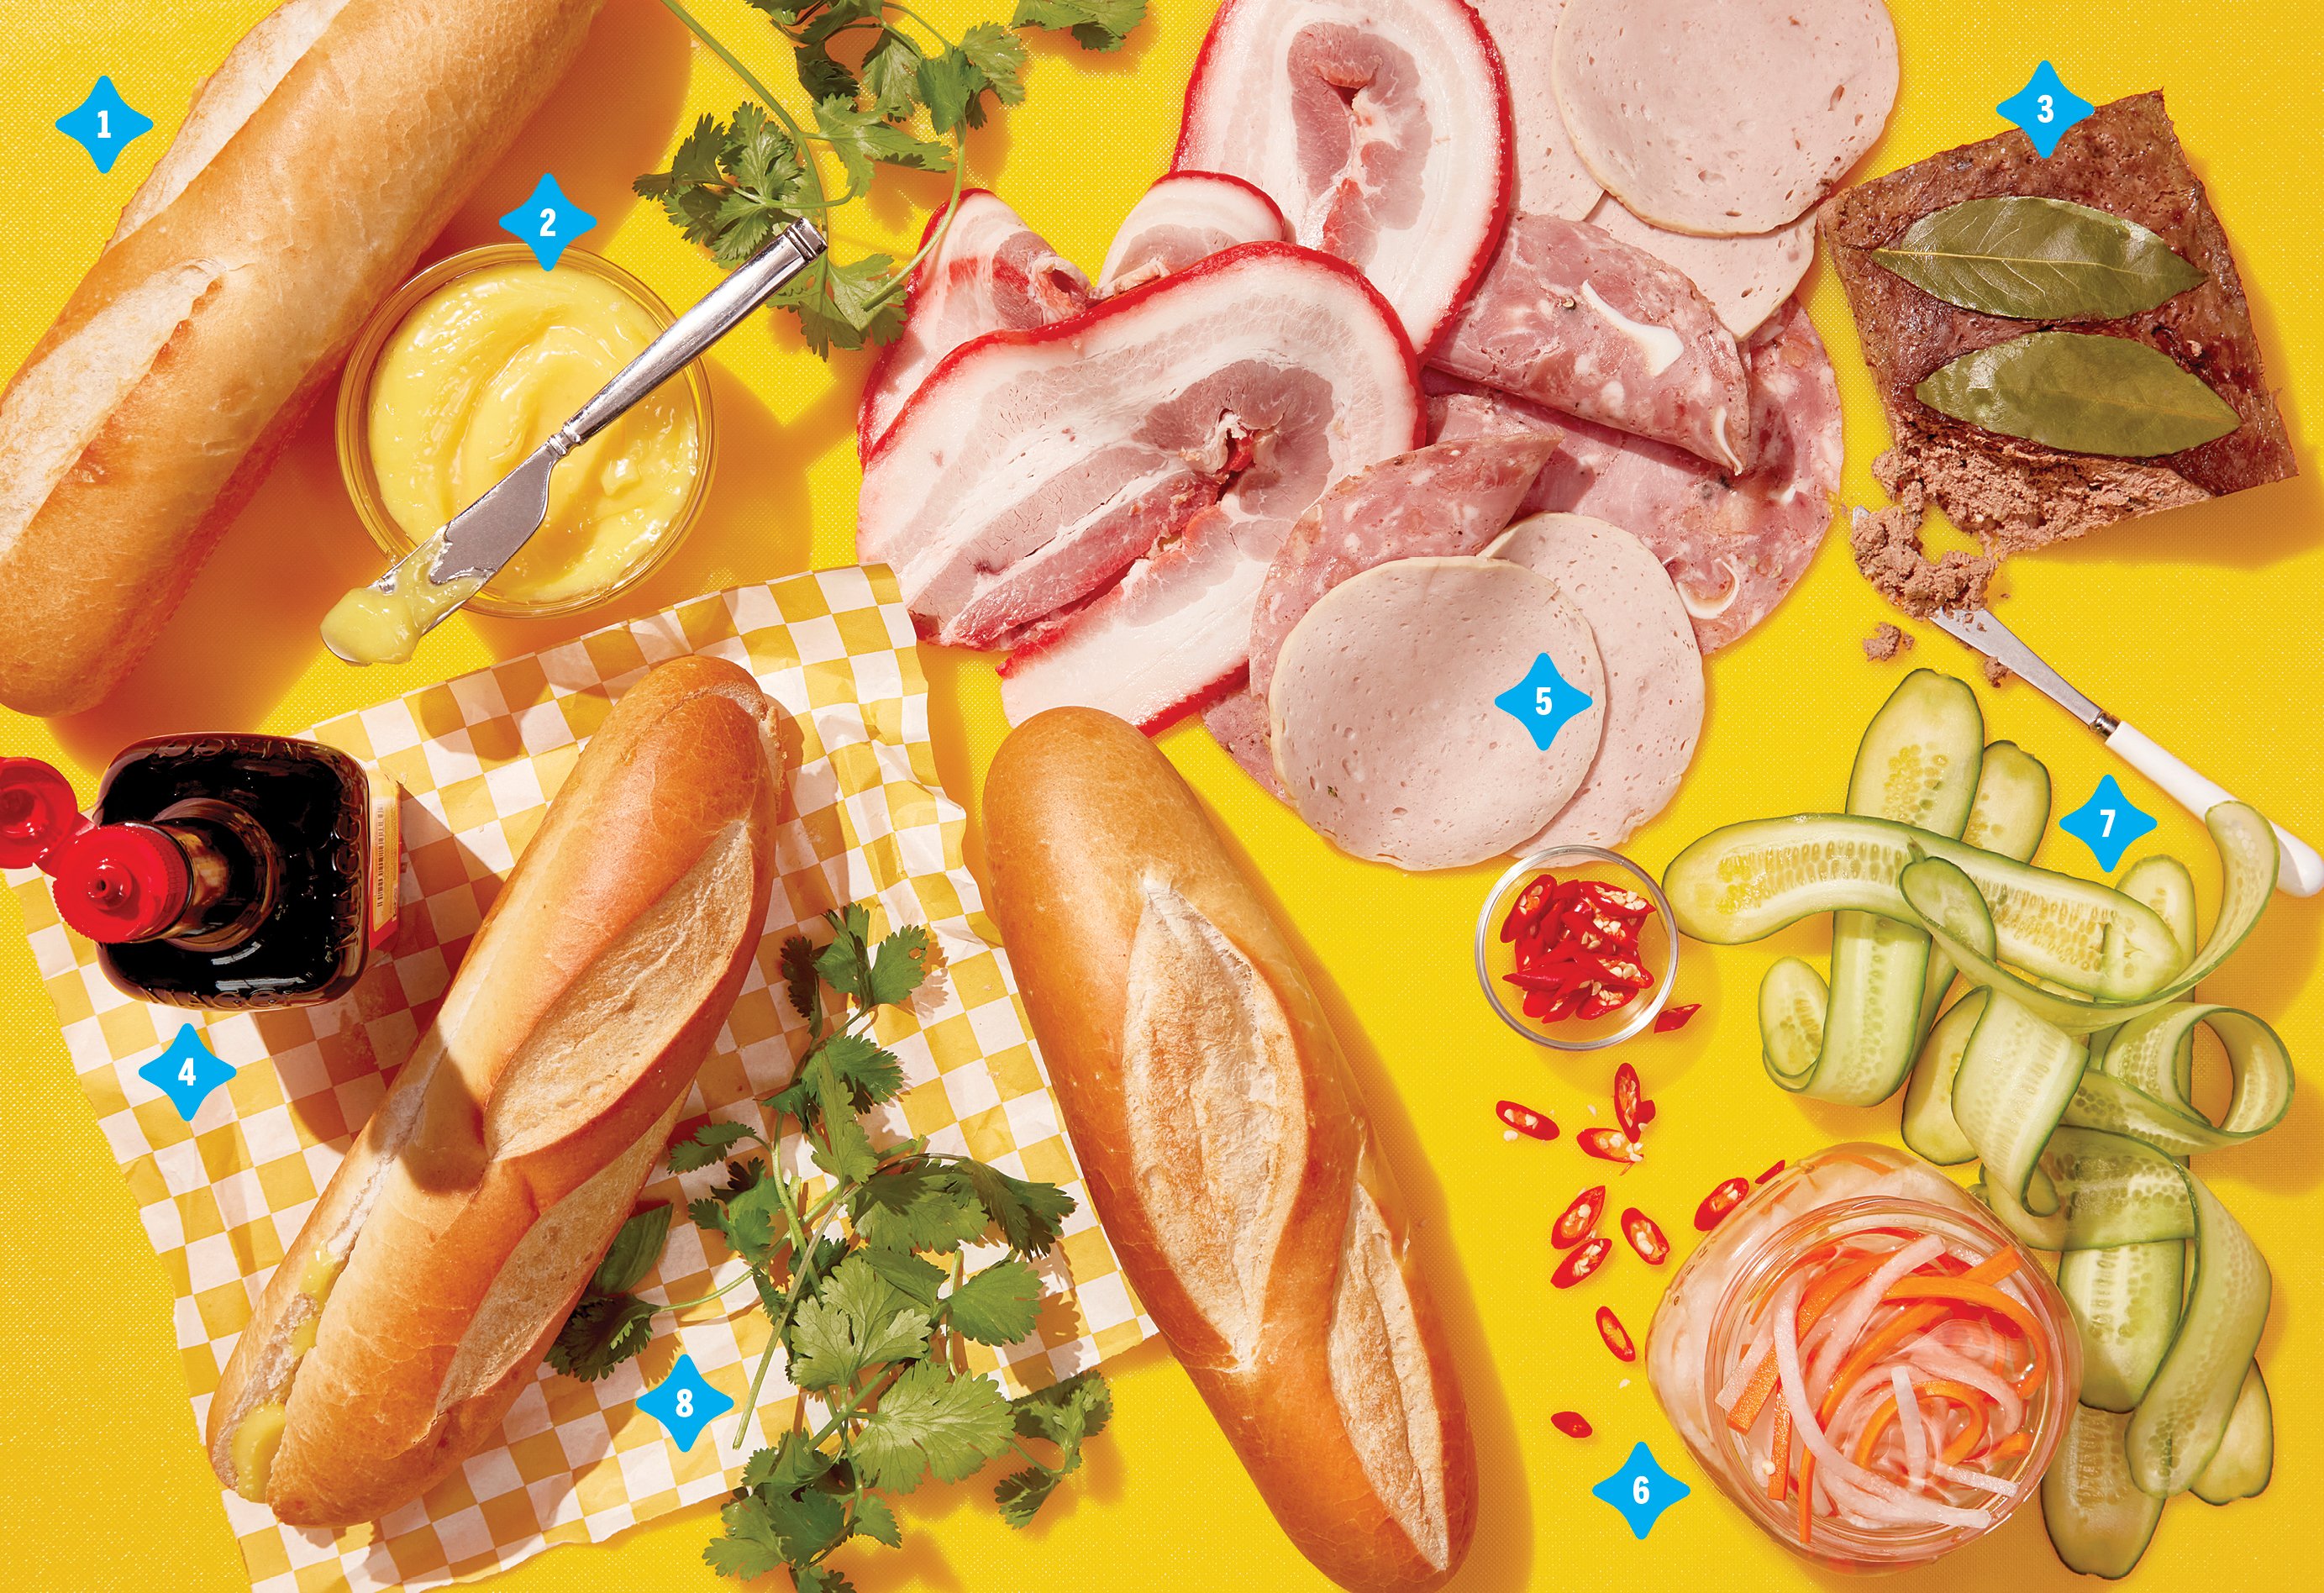 An array of banh mi essentials on a yellow background, including Maggi sauce, baguettes, bo, pate, and cucumbers